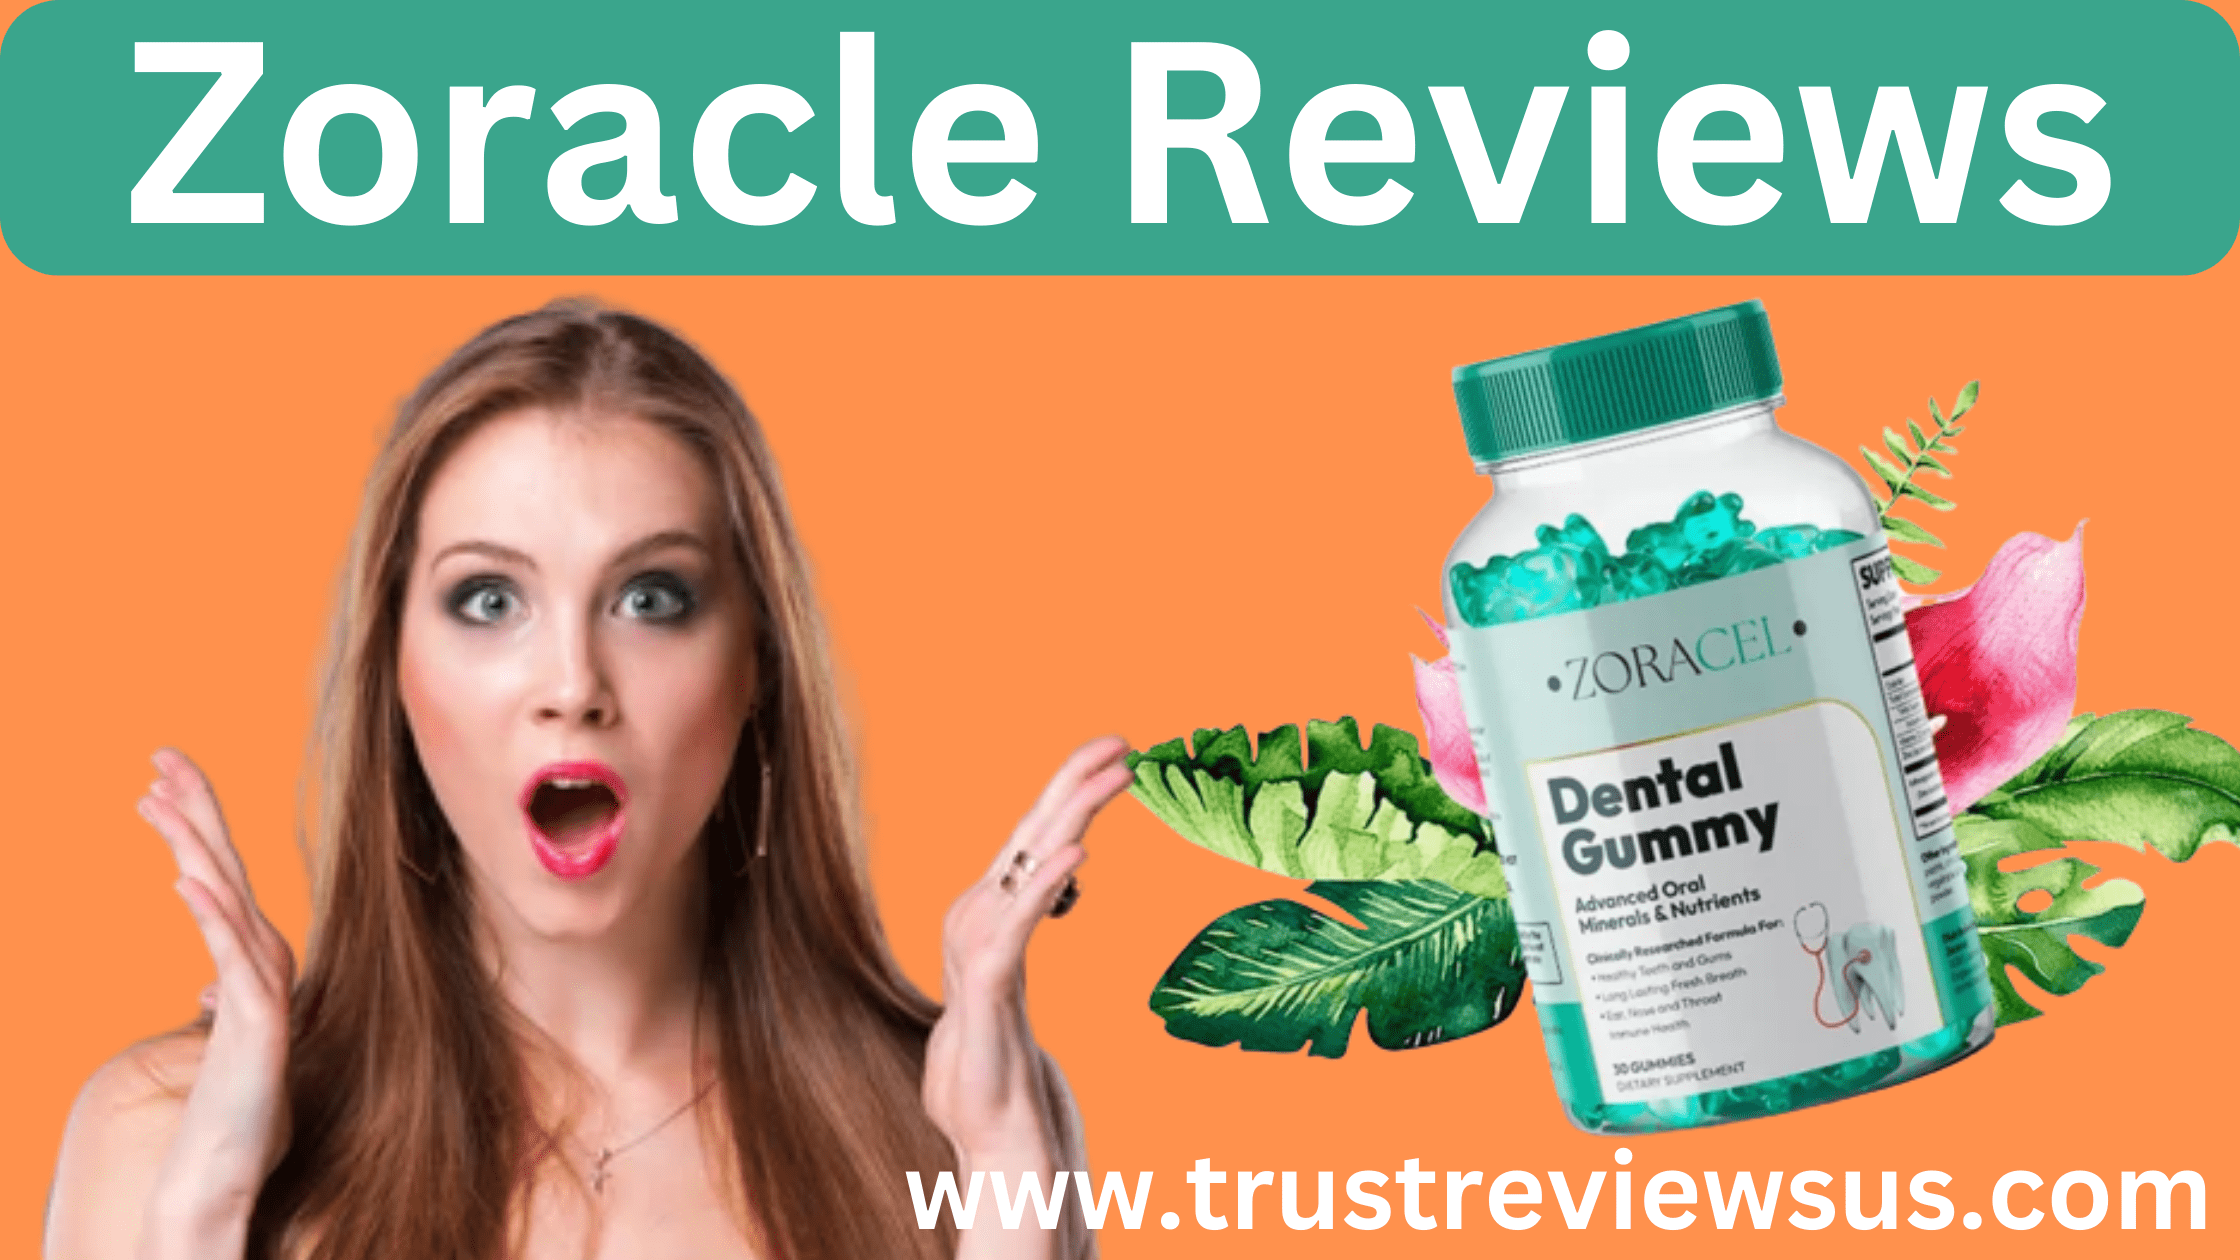 Zoracle Reviews